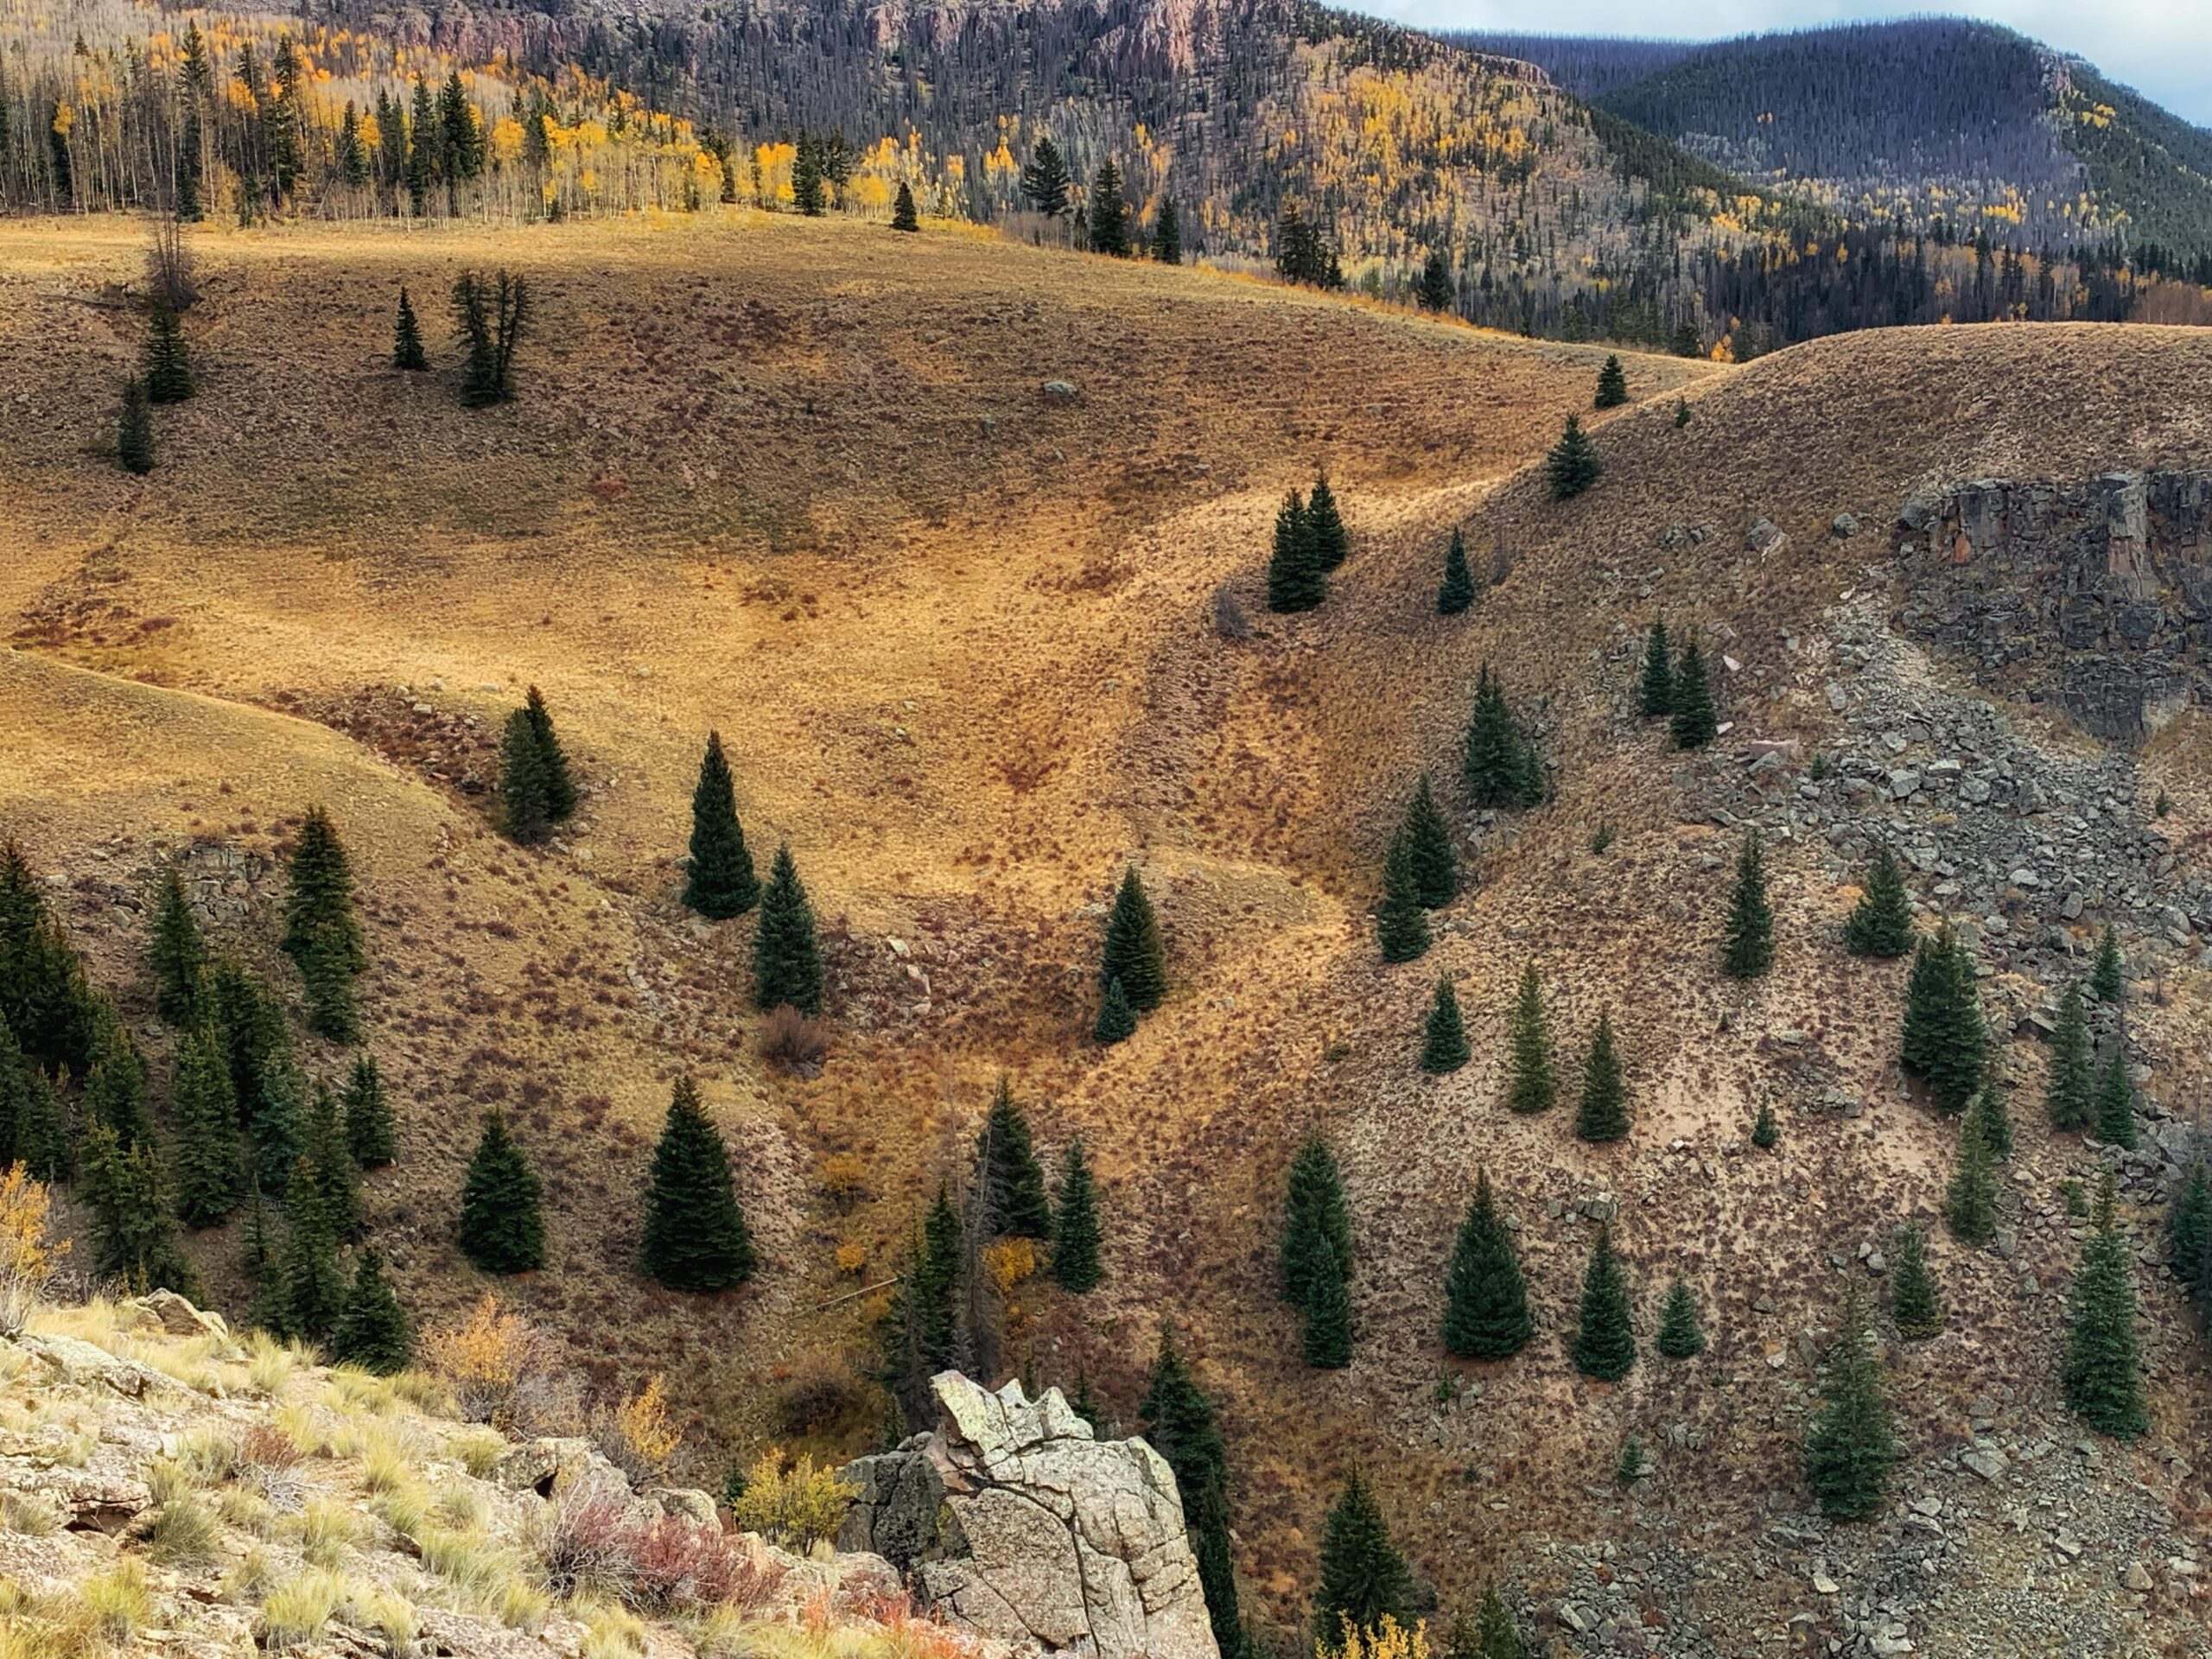 A rocky hillside with trees in the fall.